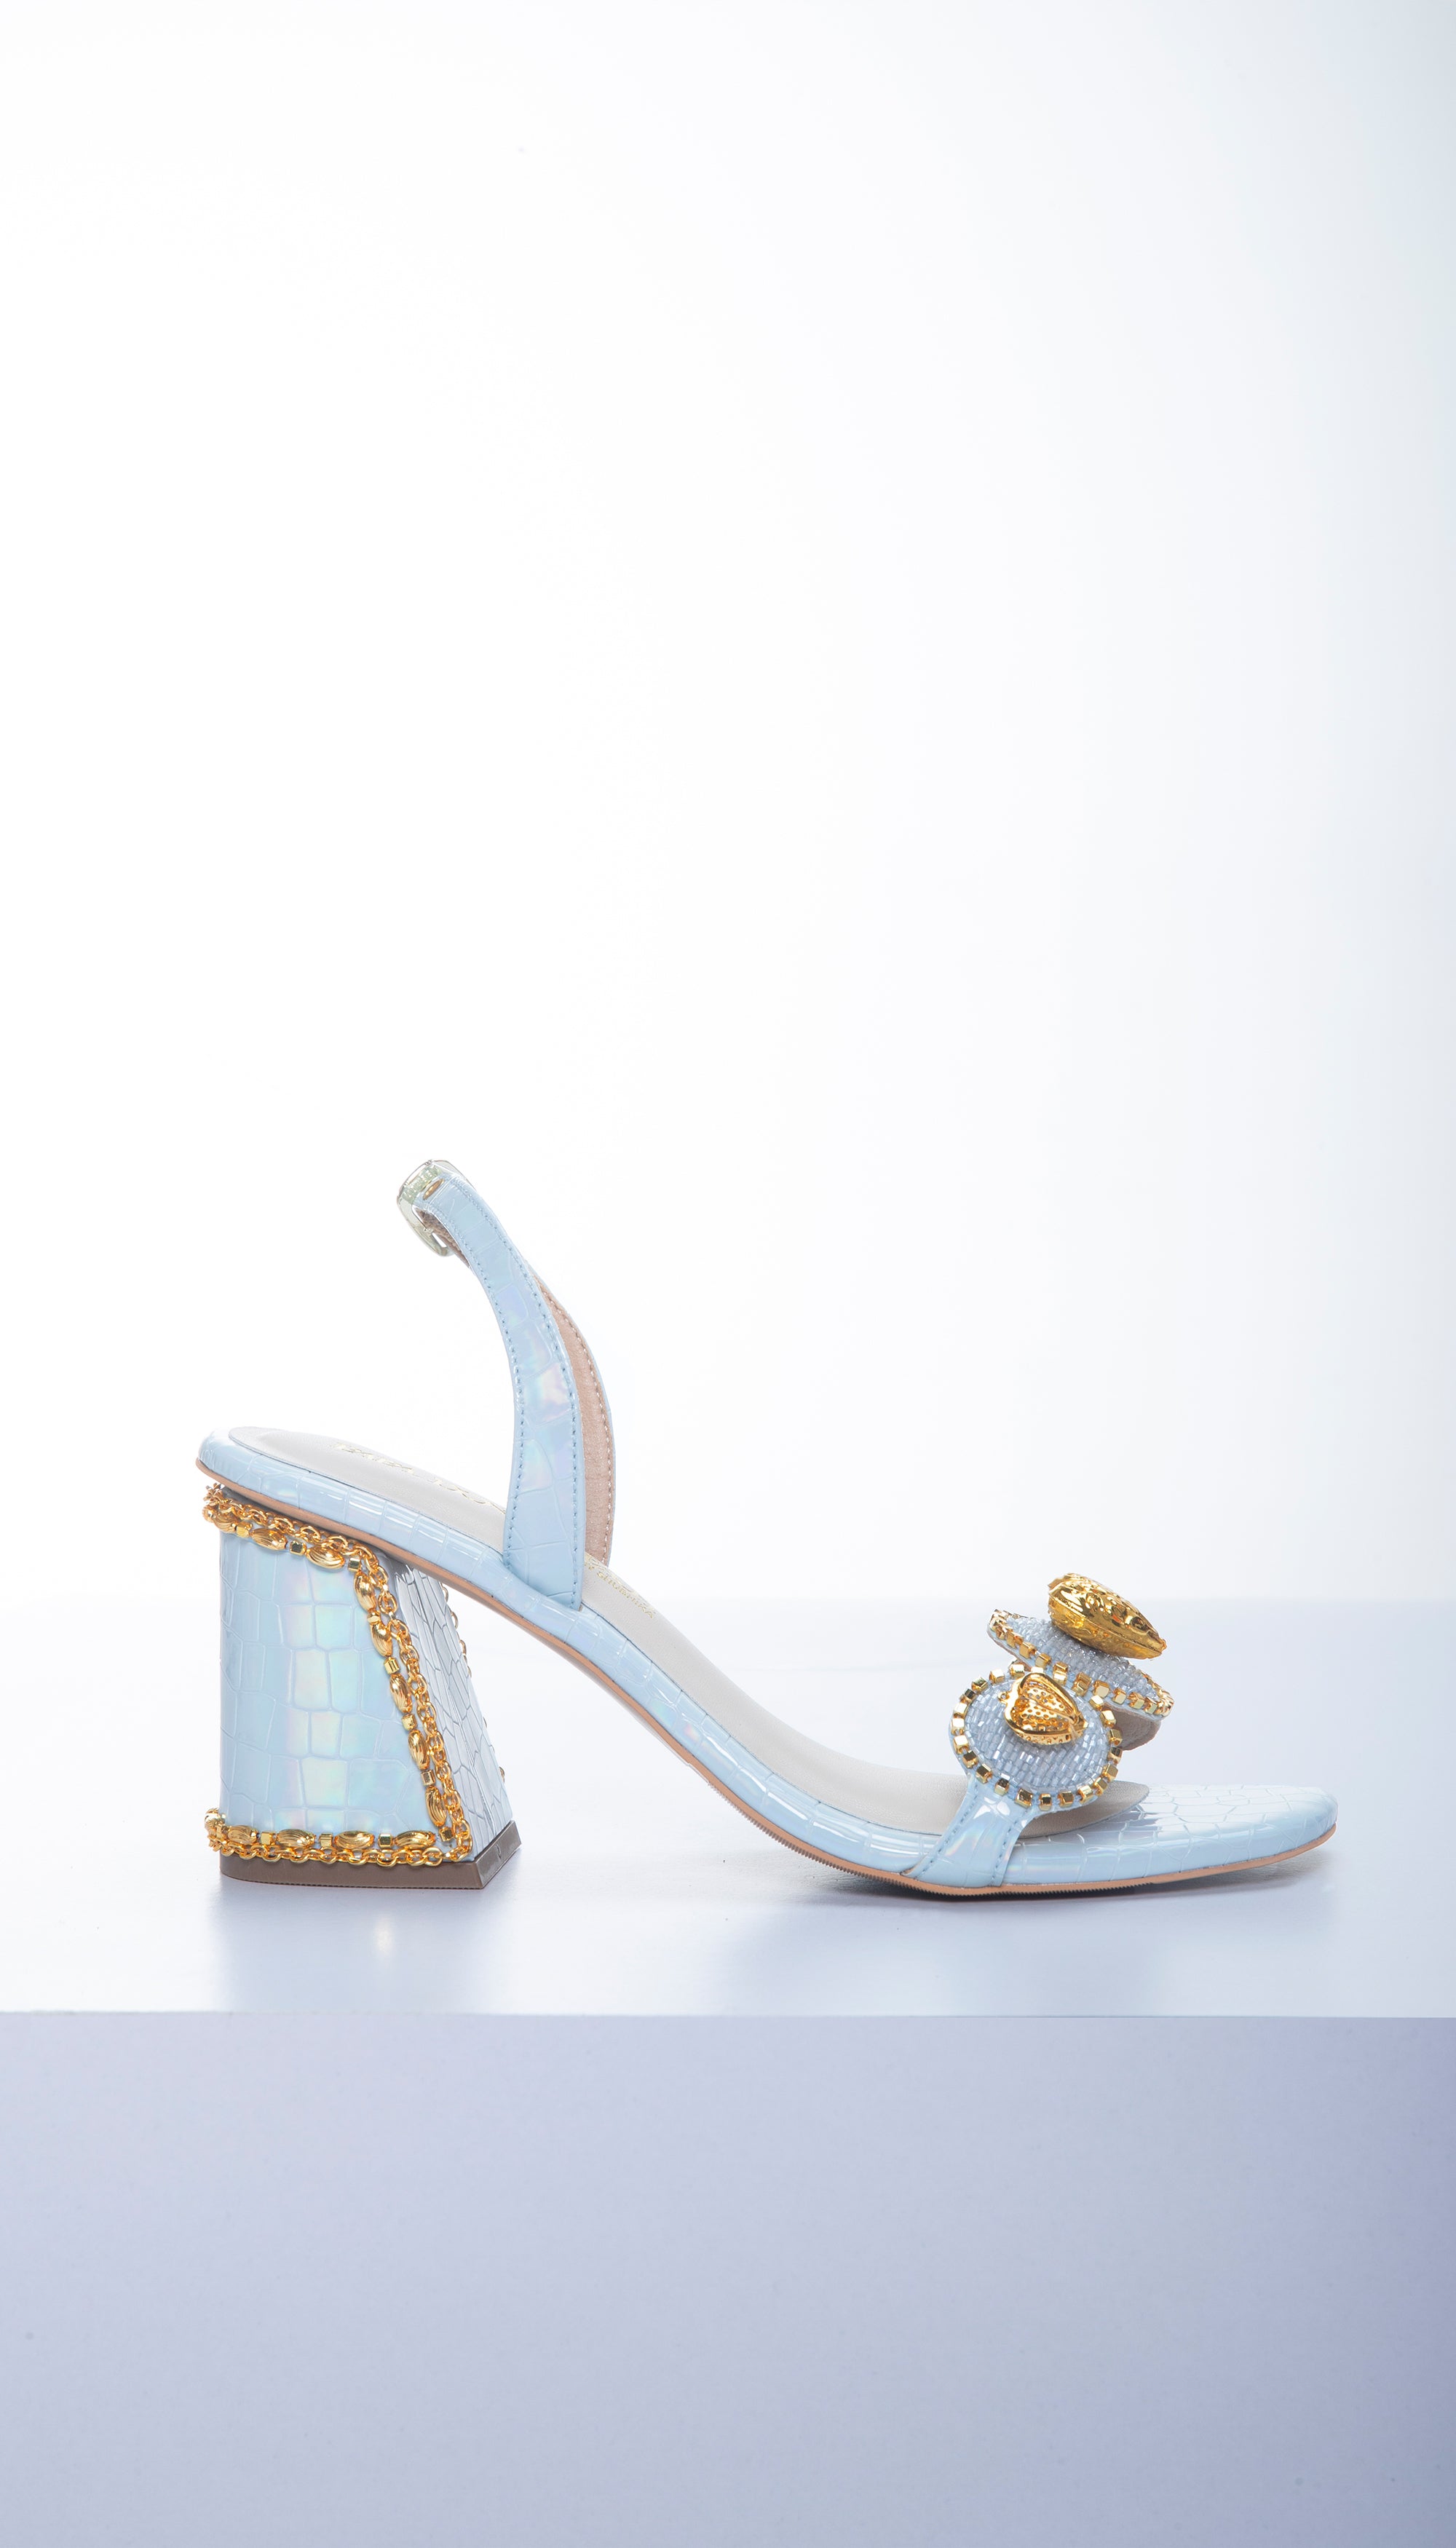 Buy Light Blue Wedding Shoes Online In India - Etsy India